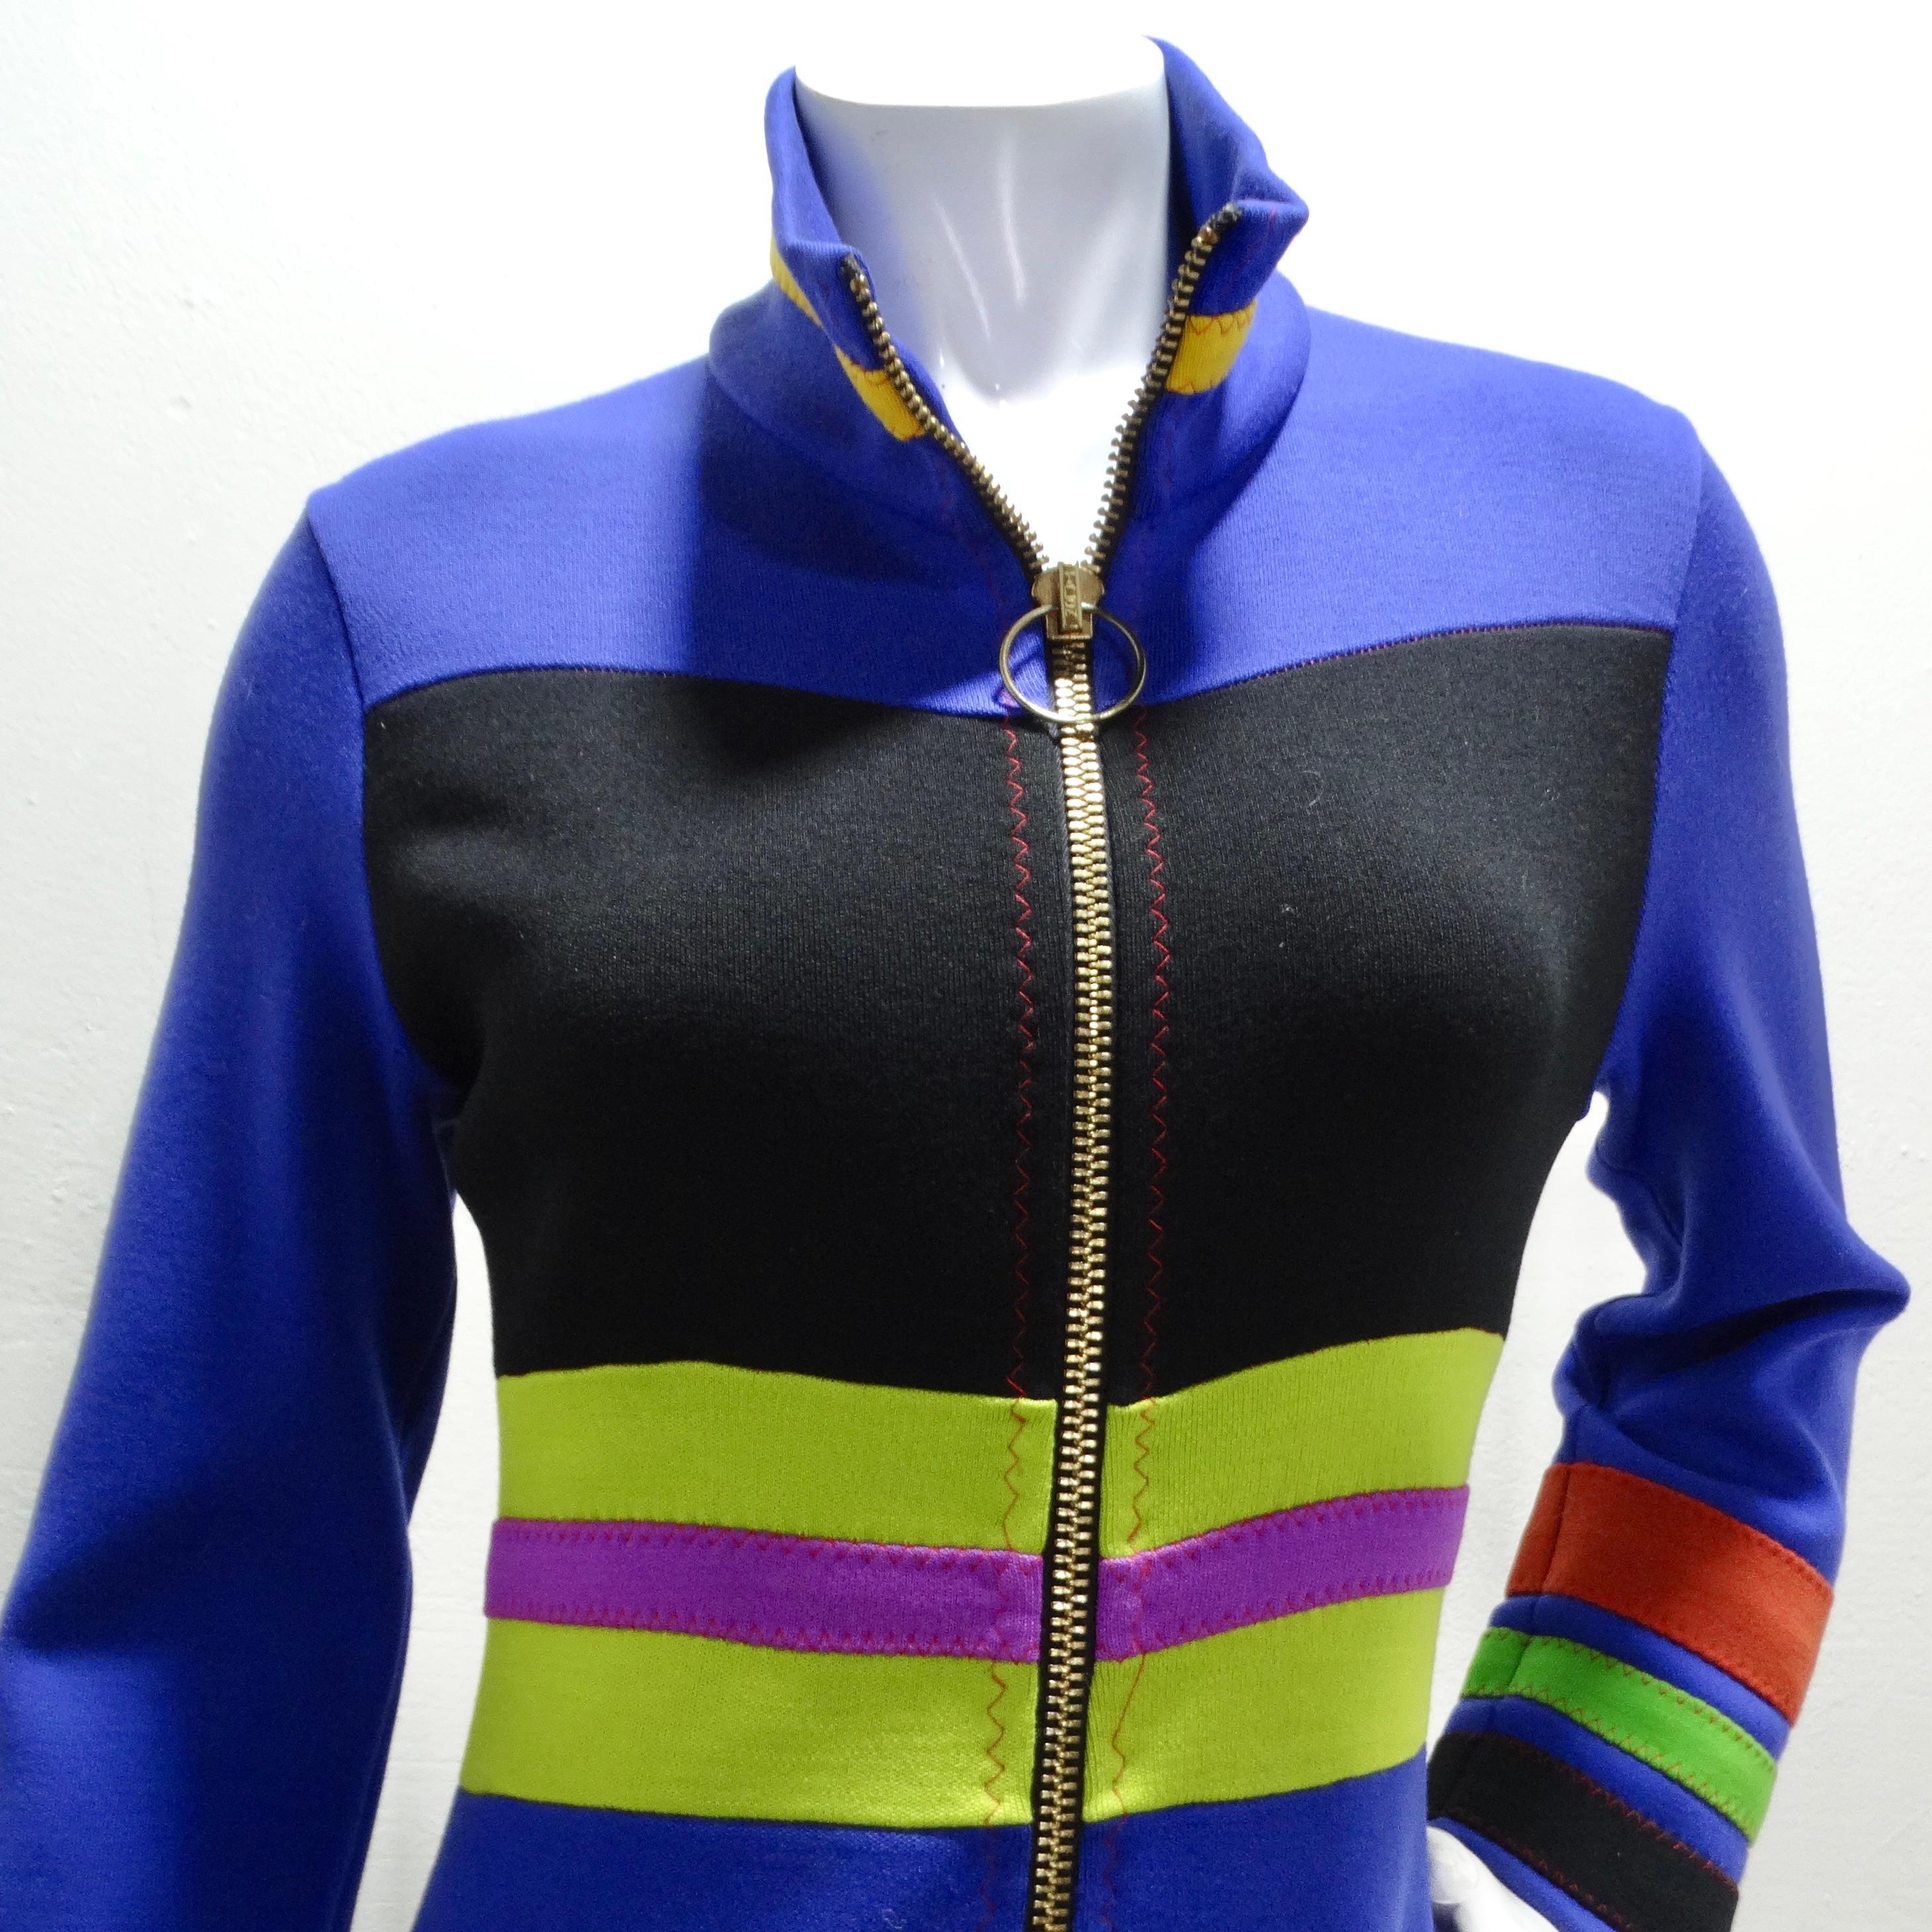 Introducing the 1960s Mod Color Block Jacket Dress from I. Magnin, a unique and special piece that embodies the bold and playful spirit of the era. This mid-length jacket doubles as an adorable dress when zipped up, offering versatility and style in